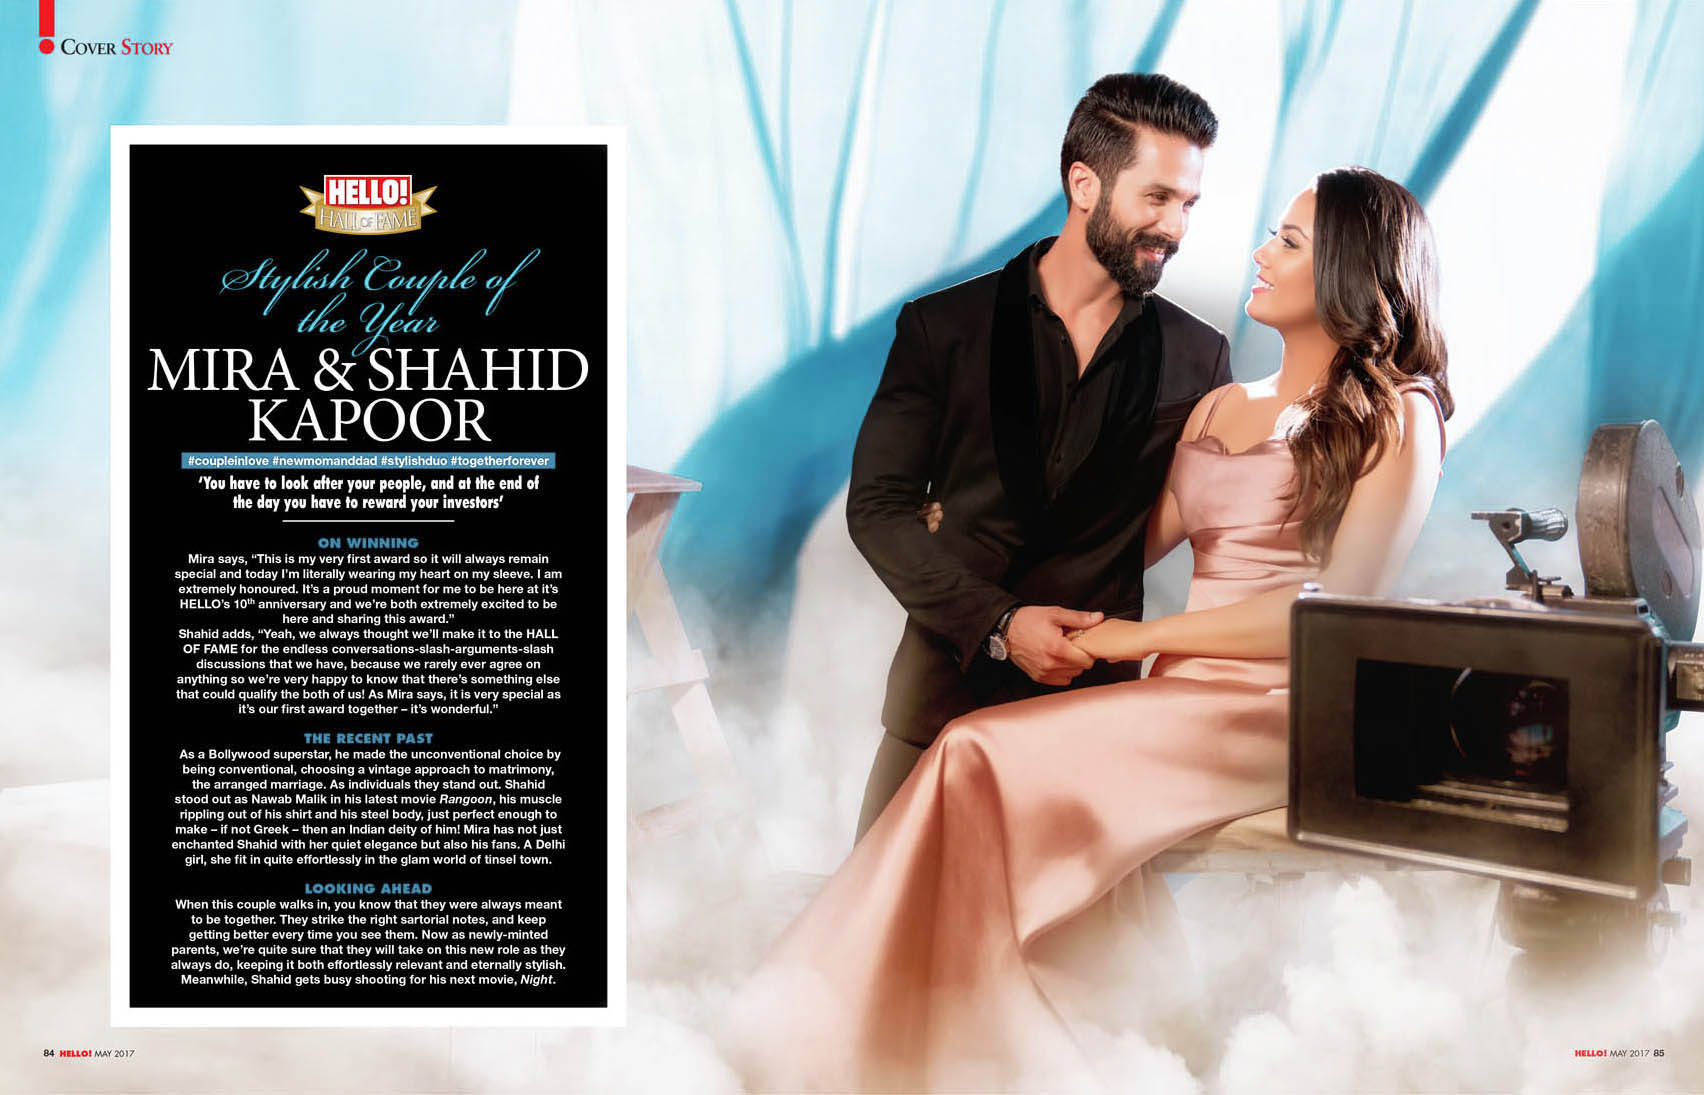 Best Bollywood Photographer in India Vikram Bawa, Actor Shahid Kapoor & Mira Kapoor for Hello Magazine, Shooting with Star, Advertising Photographer, Best Published Photographer, Best Editorial Photographer Vikram Bawa in Mumbai, India